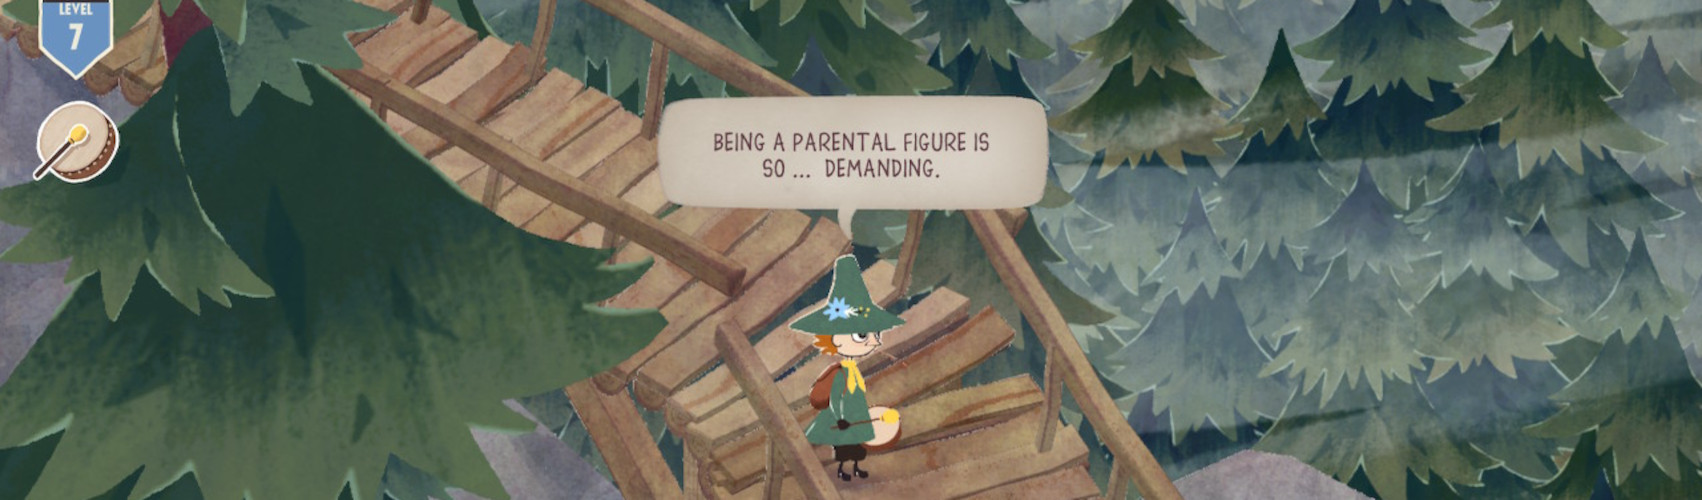 Hero image for Snufkin, wholesome anarchist role model